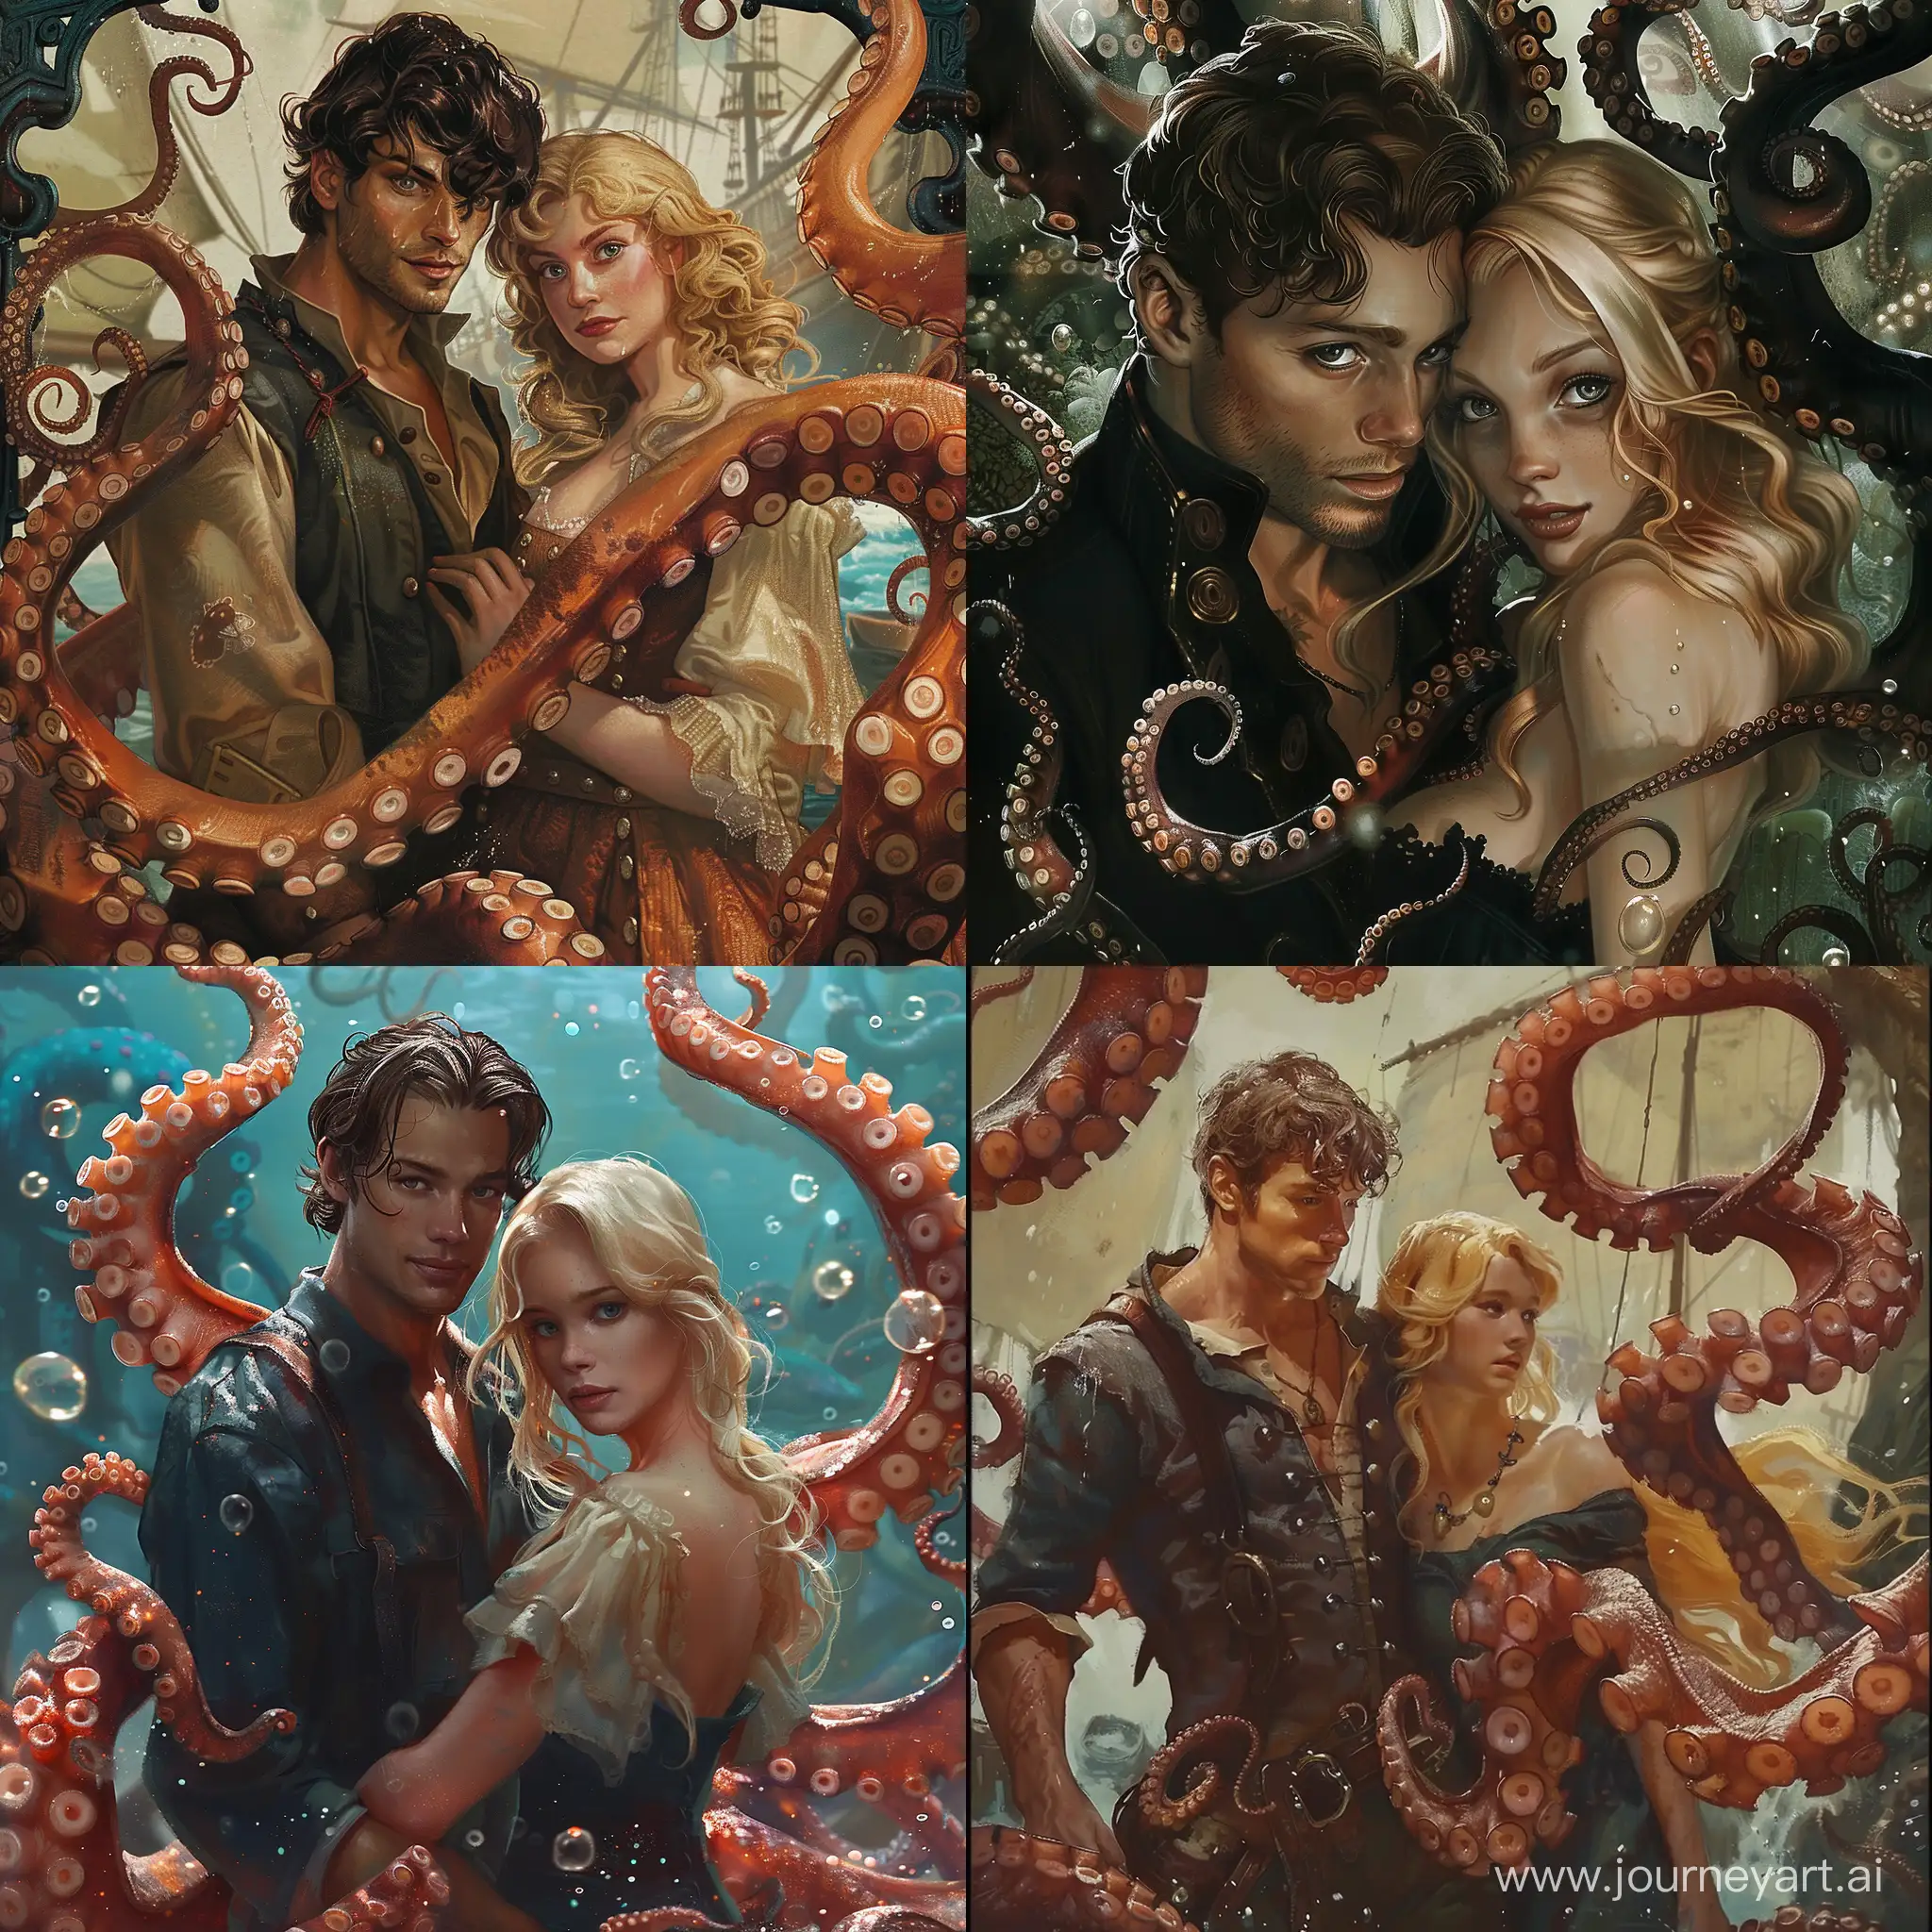 Enchanting-Fantasy-Scene-Brunet-Guy-and-Blond-Girl-with-Octopus-Tentacles